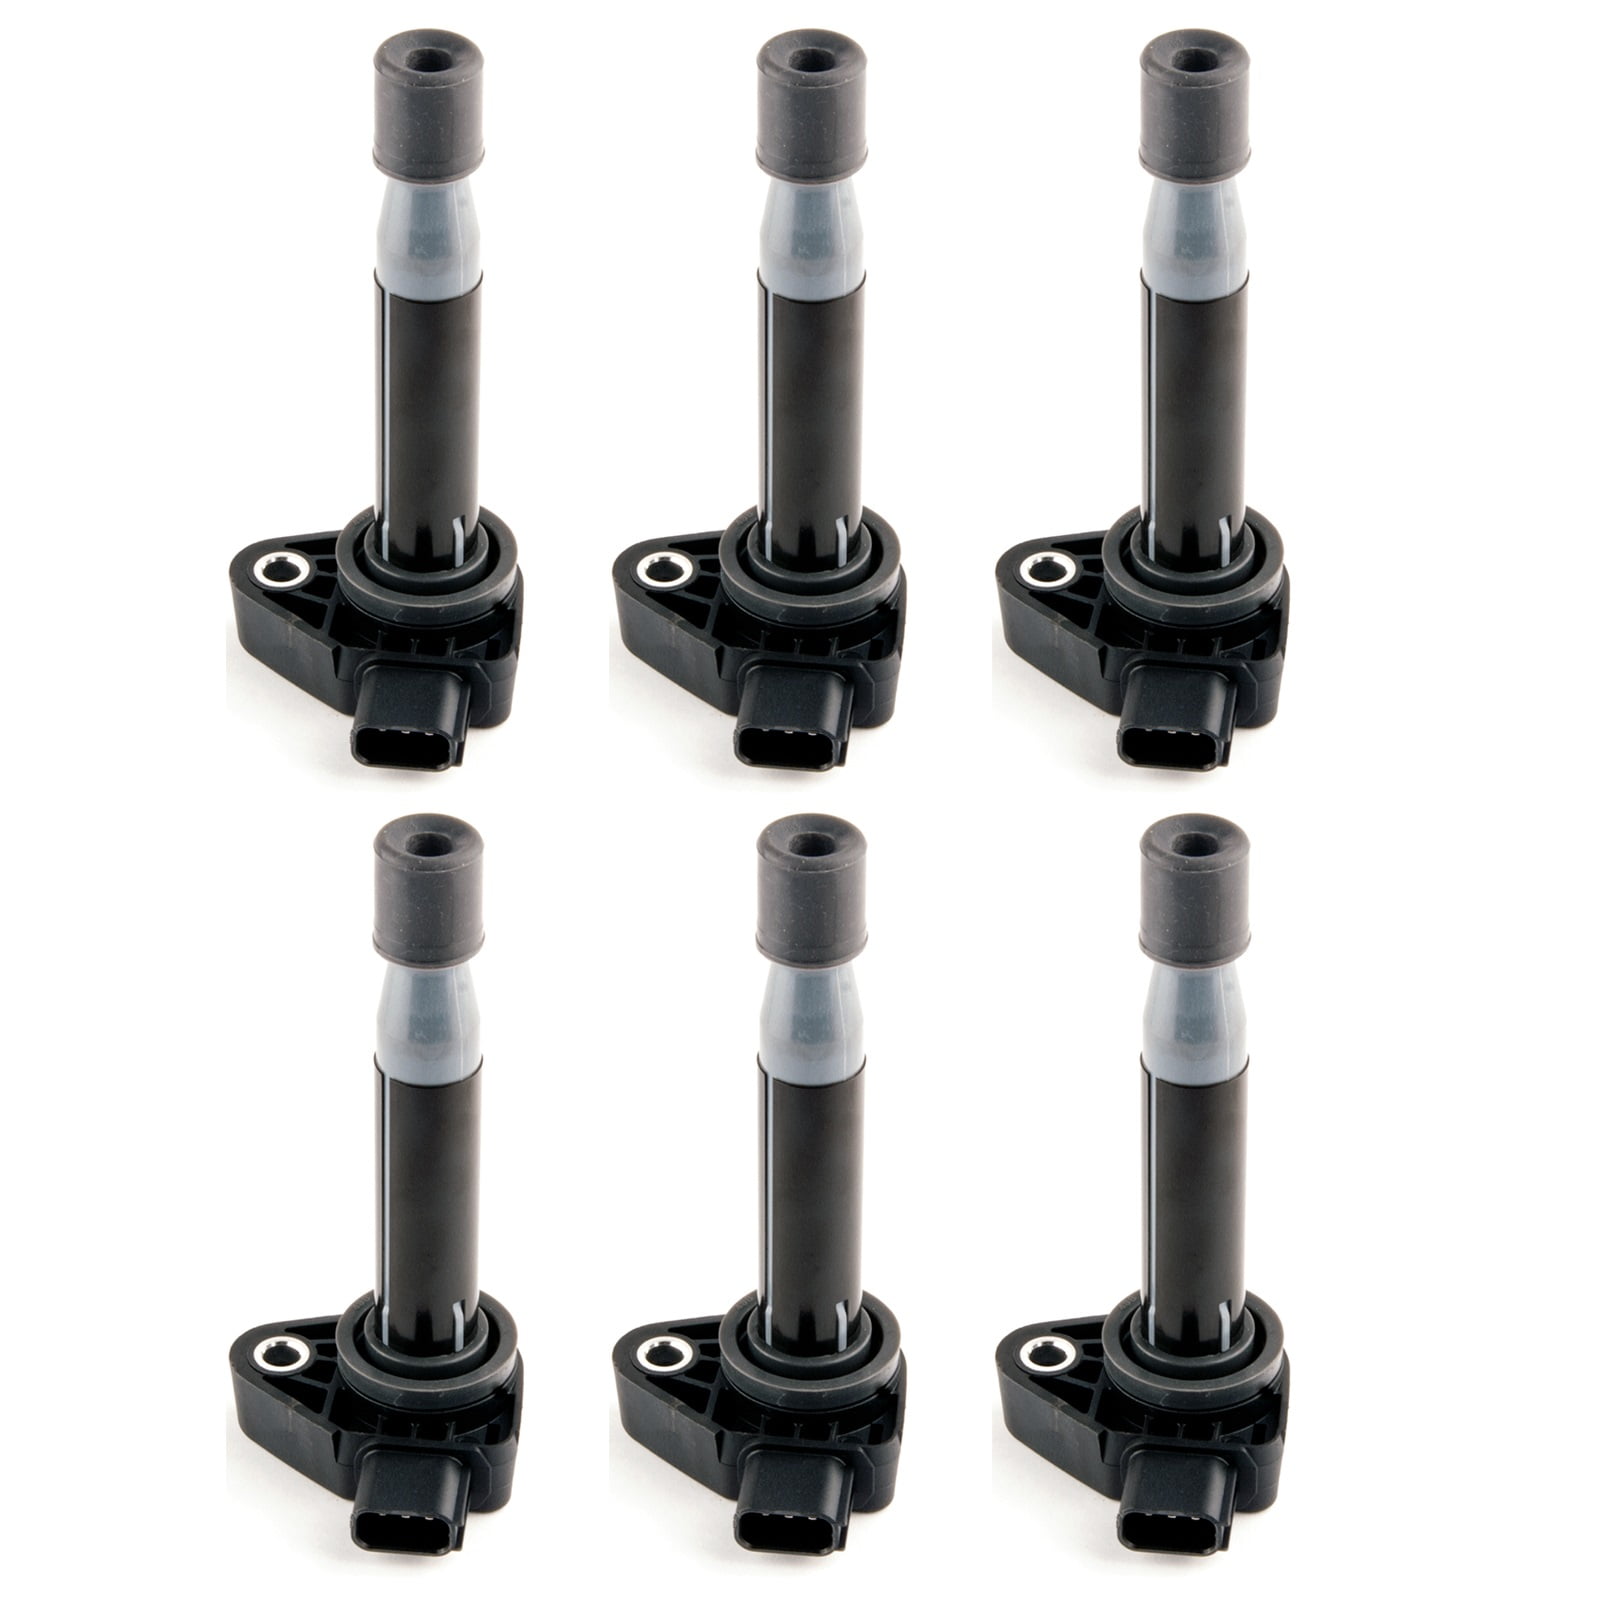 Set of 6 Denso Direct Ignition Coils for Acura CL TL RL Honda Accord Odyssey 